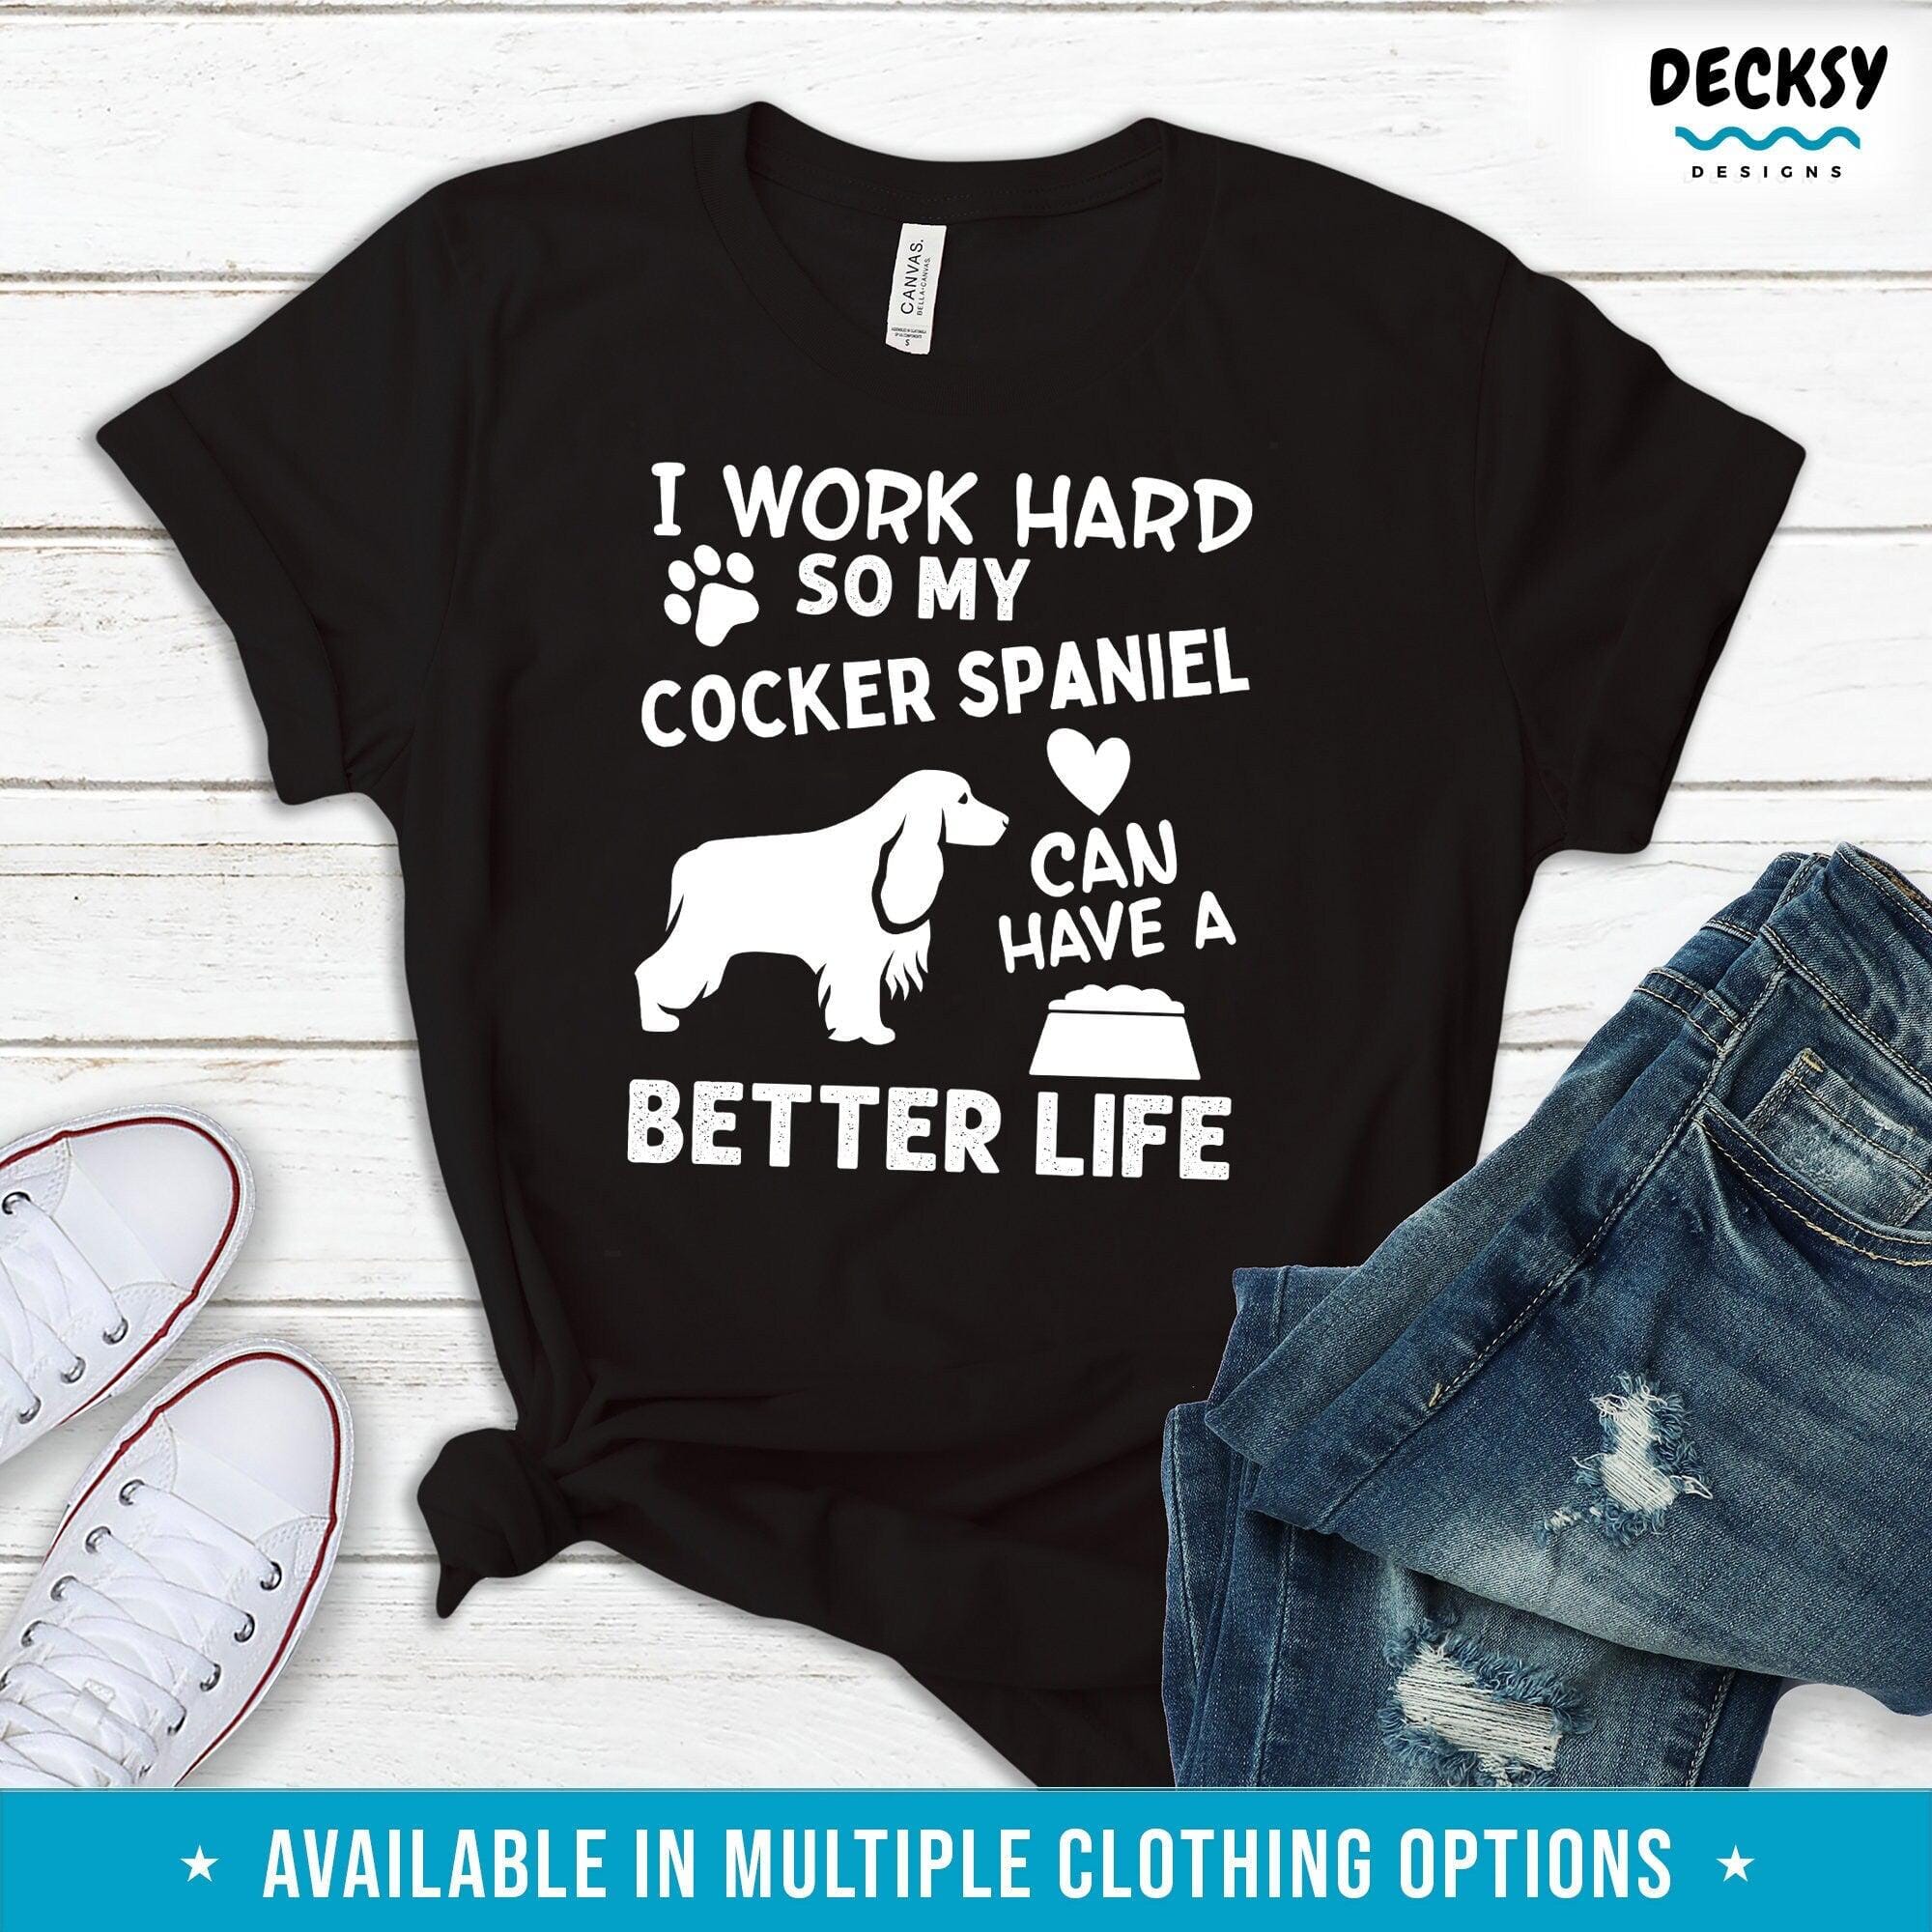 Cocker Spaniel Shirt, Dog Lover Gift-Clothing:Gender-Neutral Adult Clothing:Tops & Tees:T-shirts:Graphic Tees-DecksyDesigns